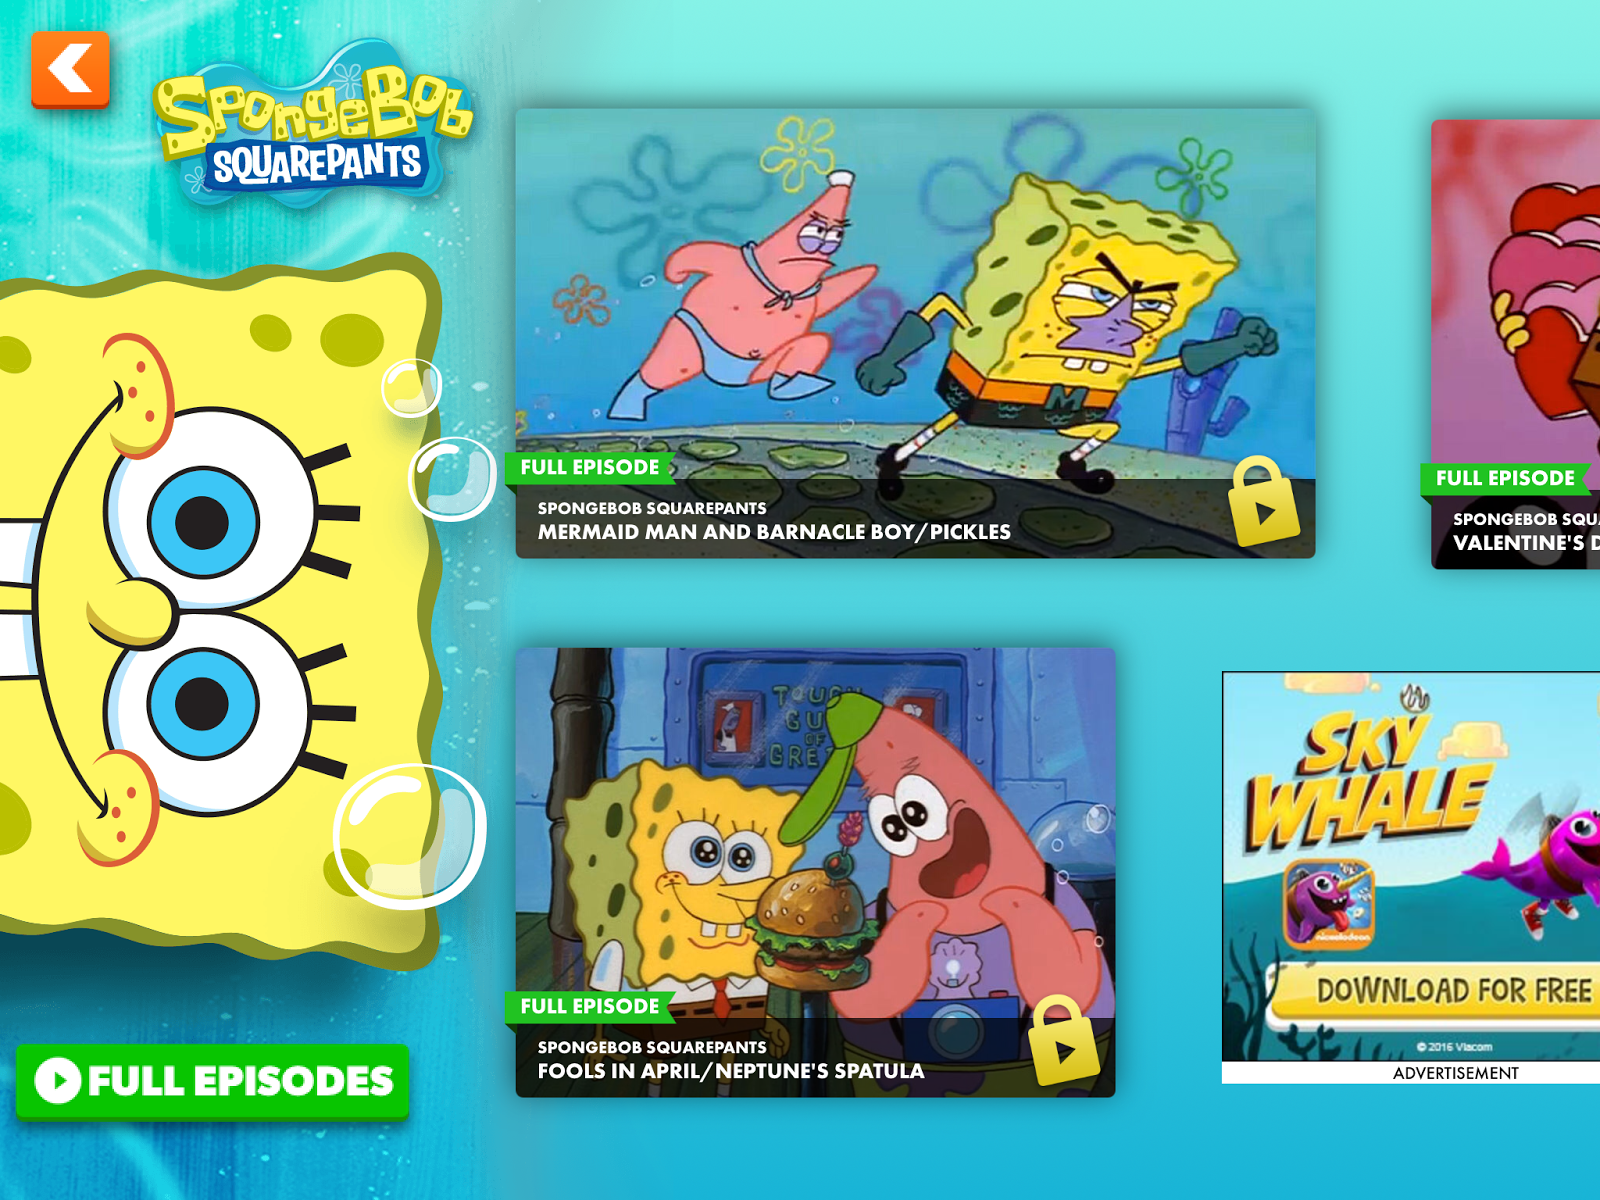 Nickalive Experience The Best And Funniest Nickelodeon Content With The First In Singapore